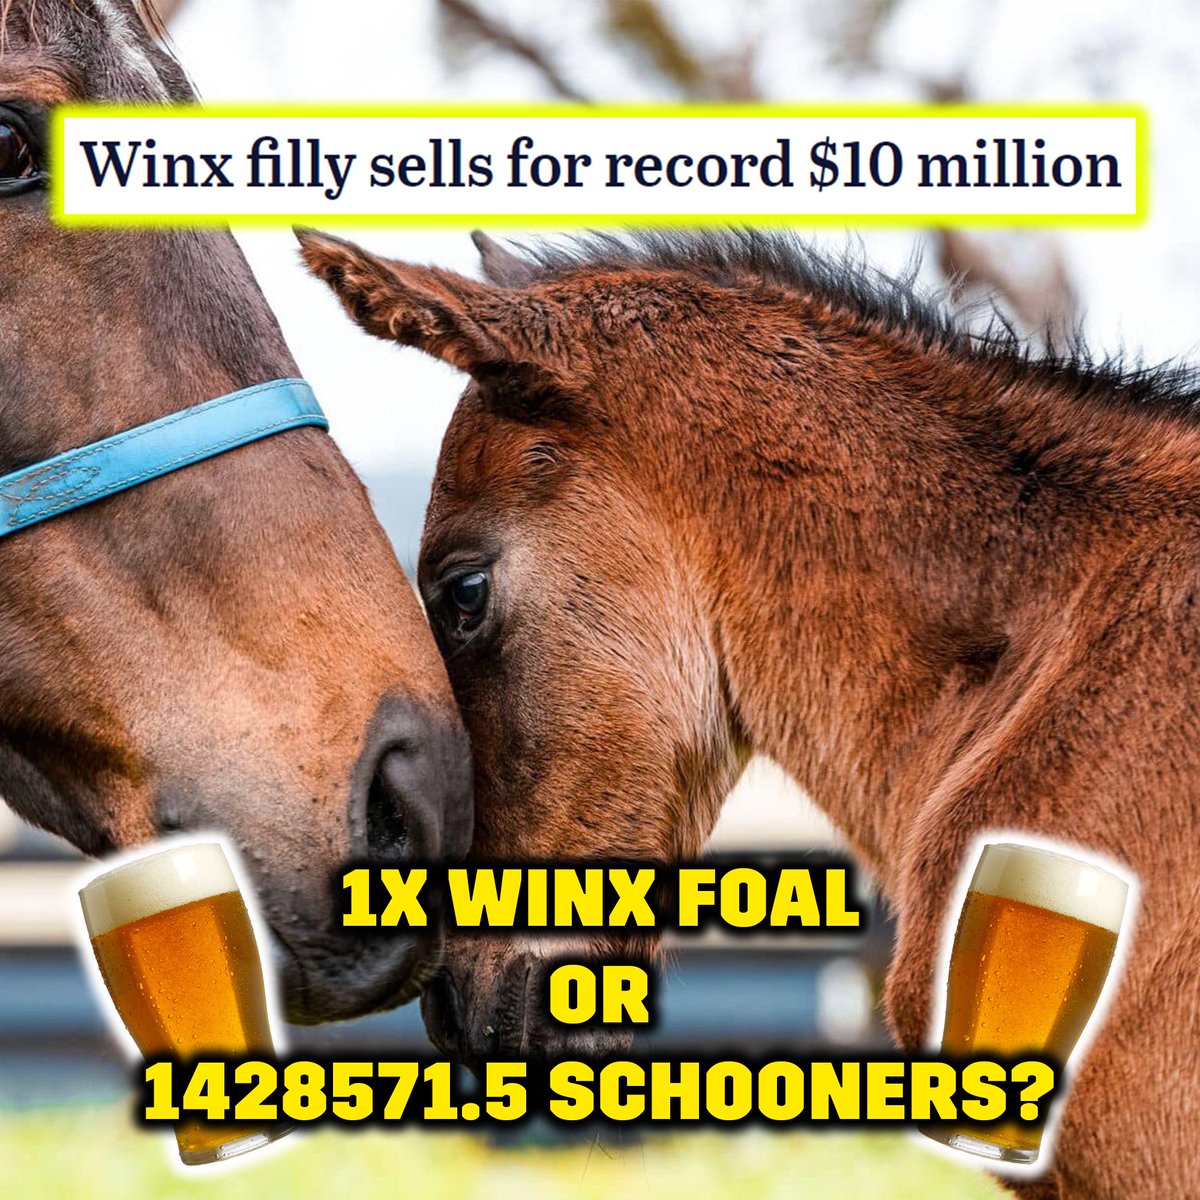 Serious question: Own Winx’s foal with no guarantee she’ll be any good OR take 1.4 million schooners you can do anything you like with?